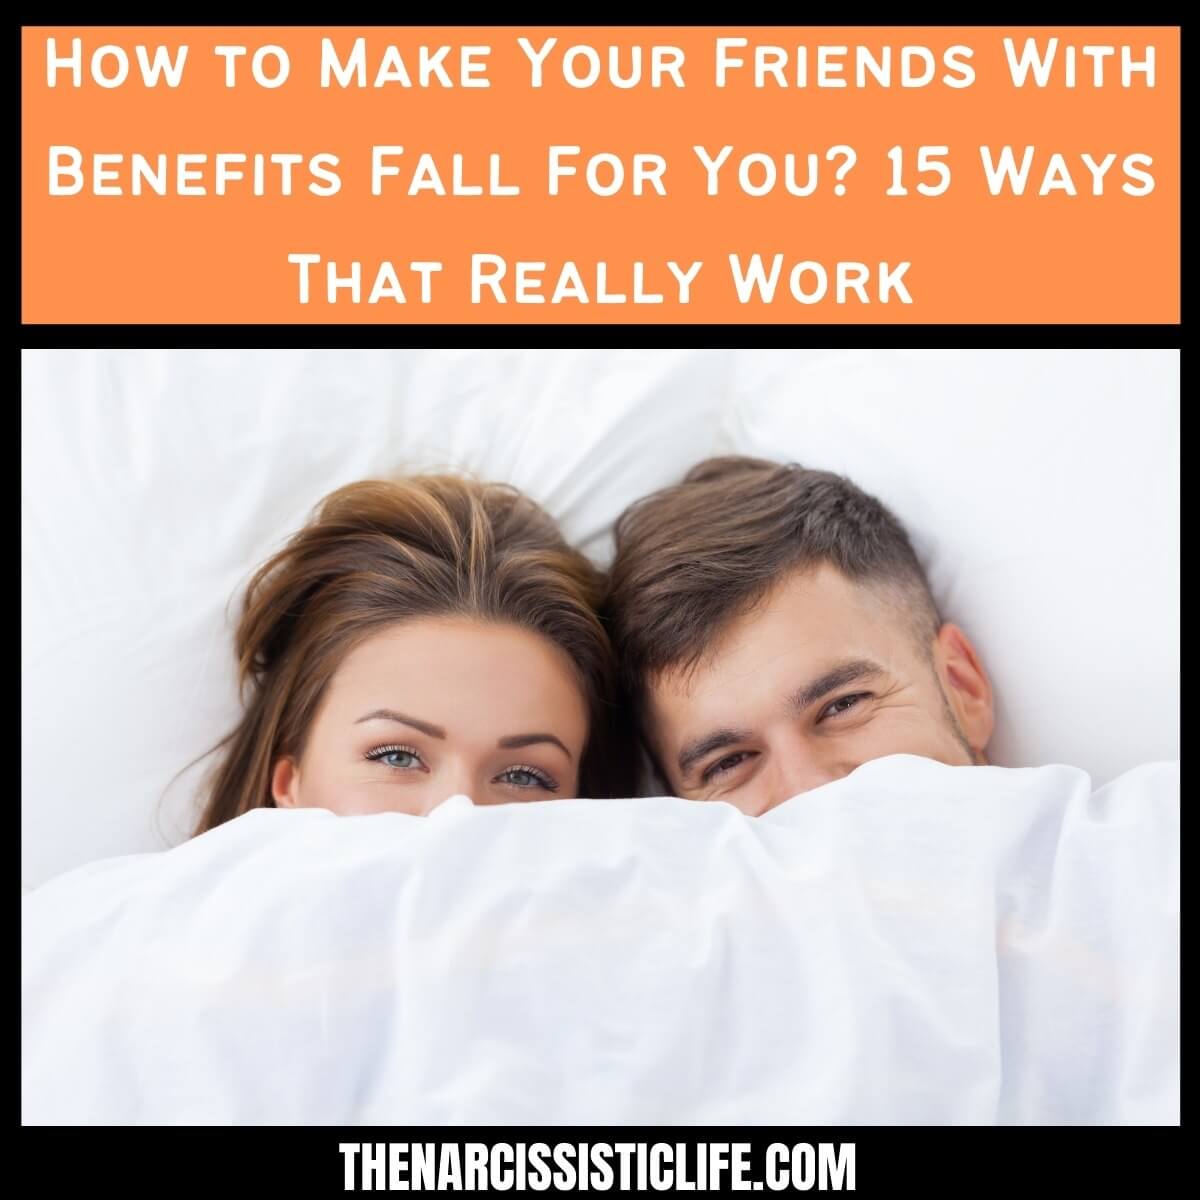 How to Make Your Friends With Benefits Fall For You?